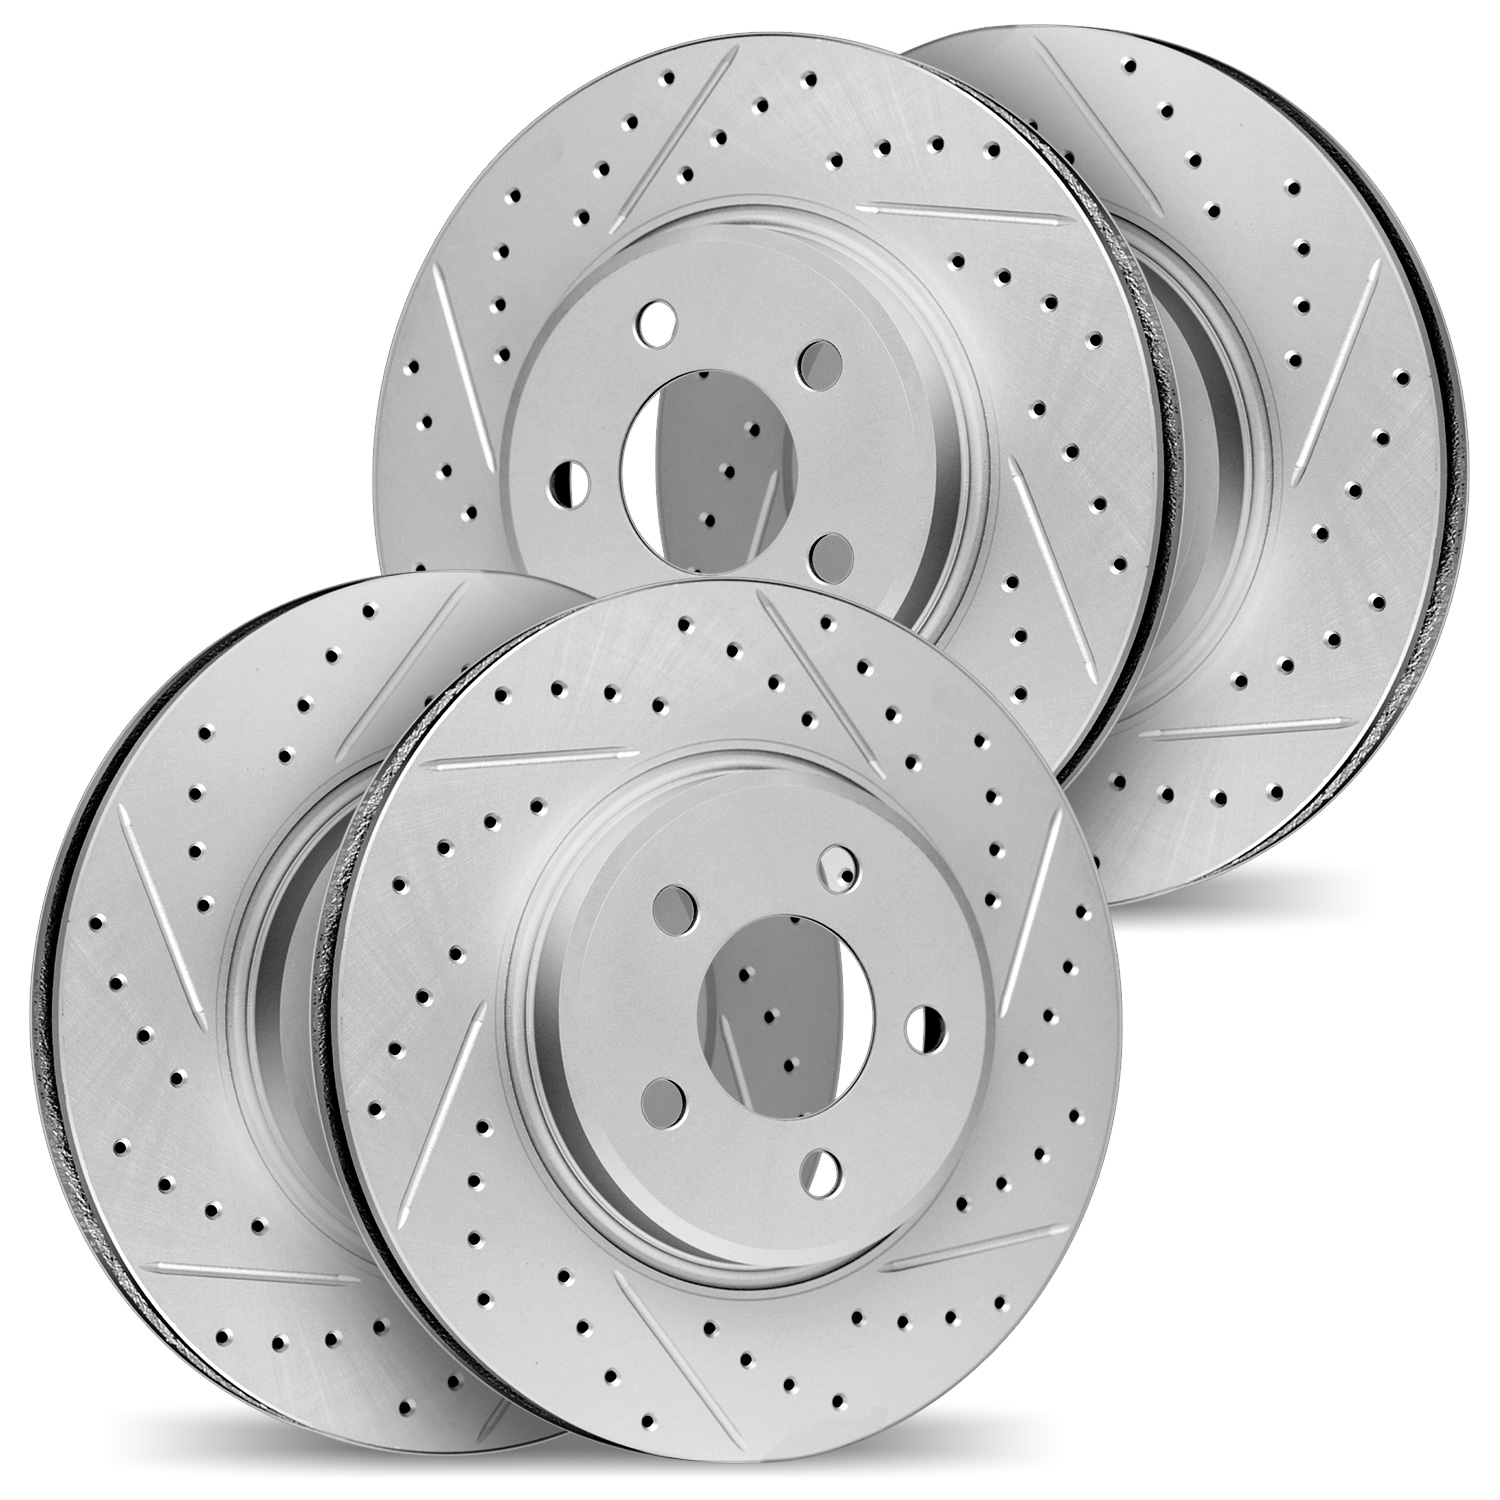 2004-31061 Geoperformance Drilled/Slotted Brake Rotors, 2016-2018 BMW, Position: Front and Rear